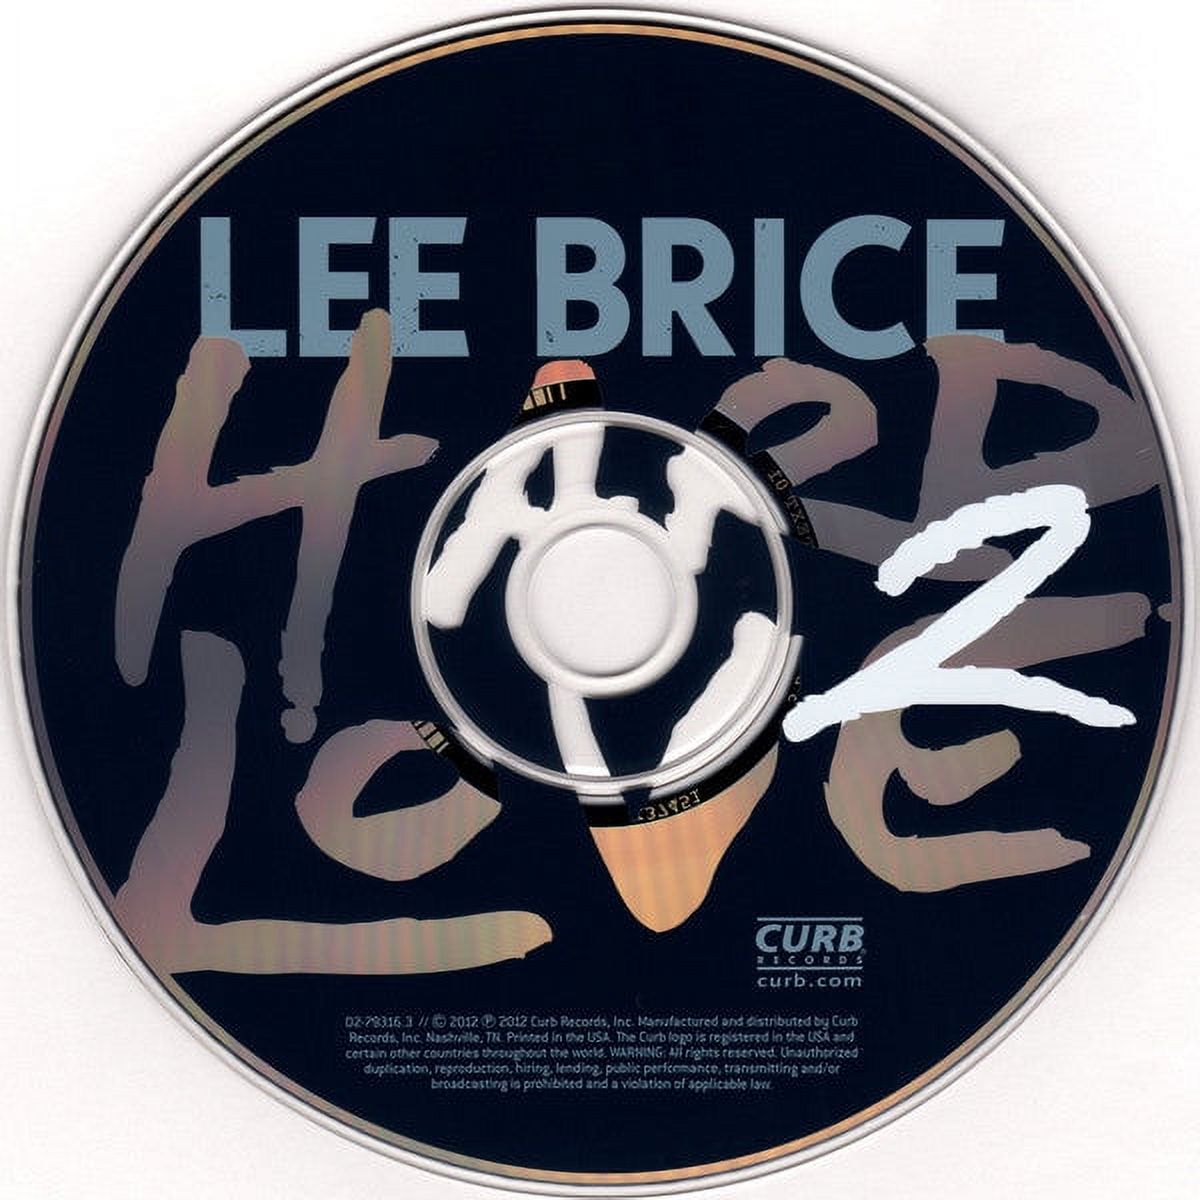 Lee Brice - Hard 2 Love - Country - CD - image 2 of 3